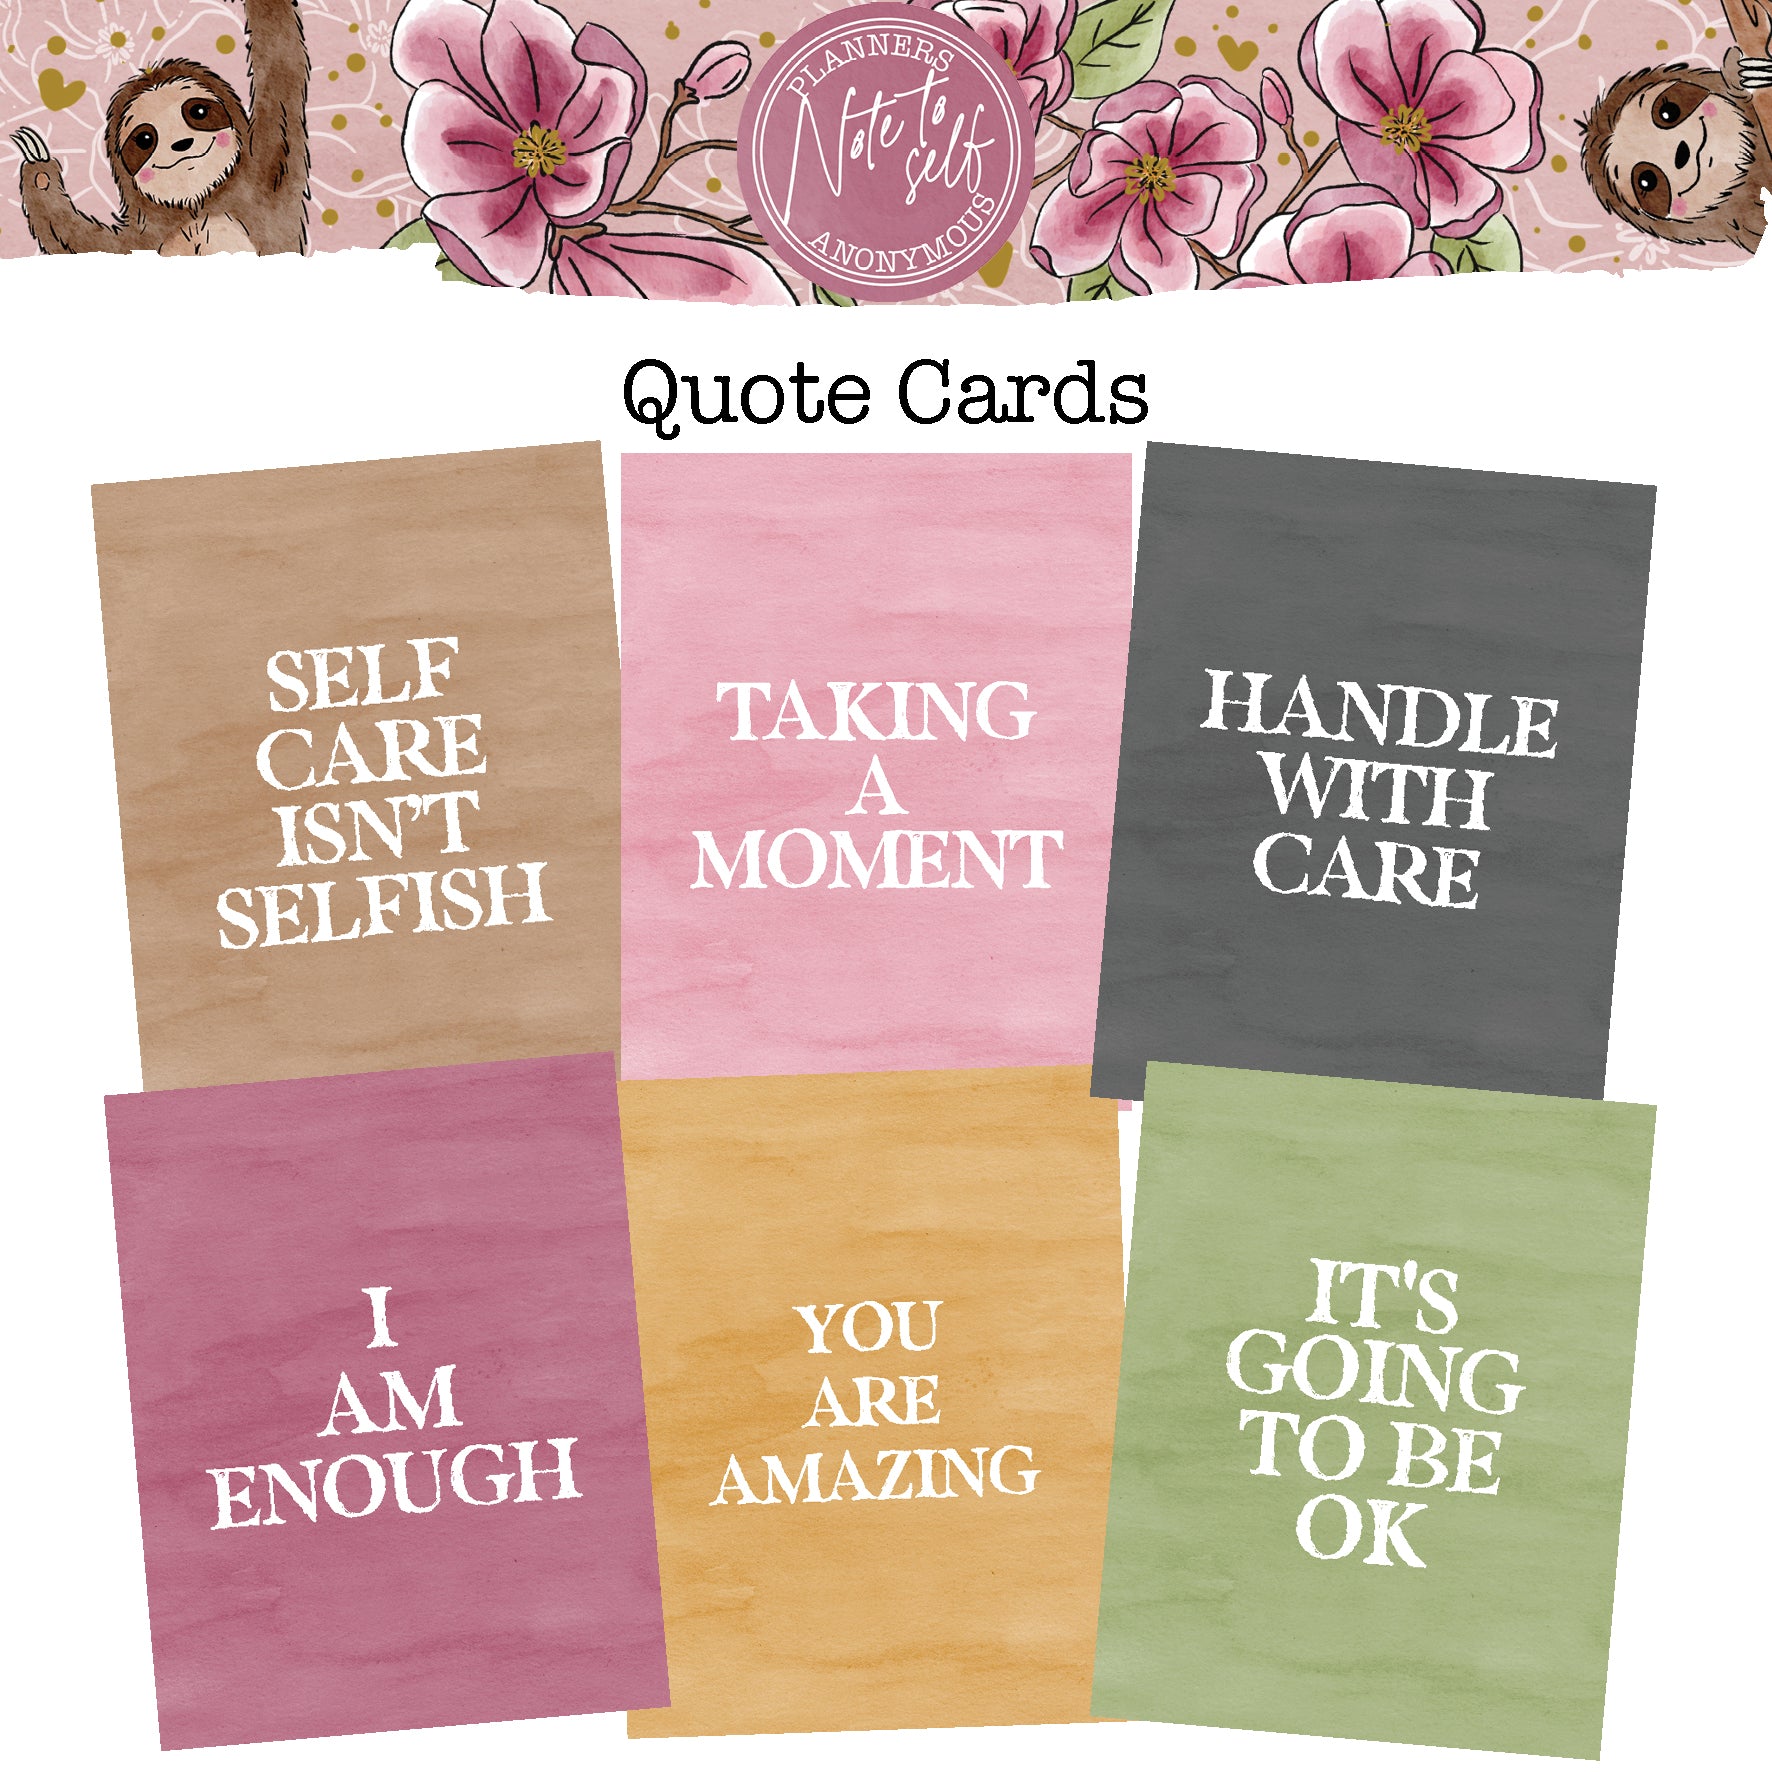 Note to Self Quote Cards